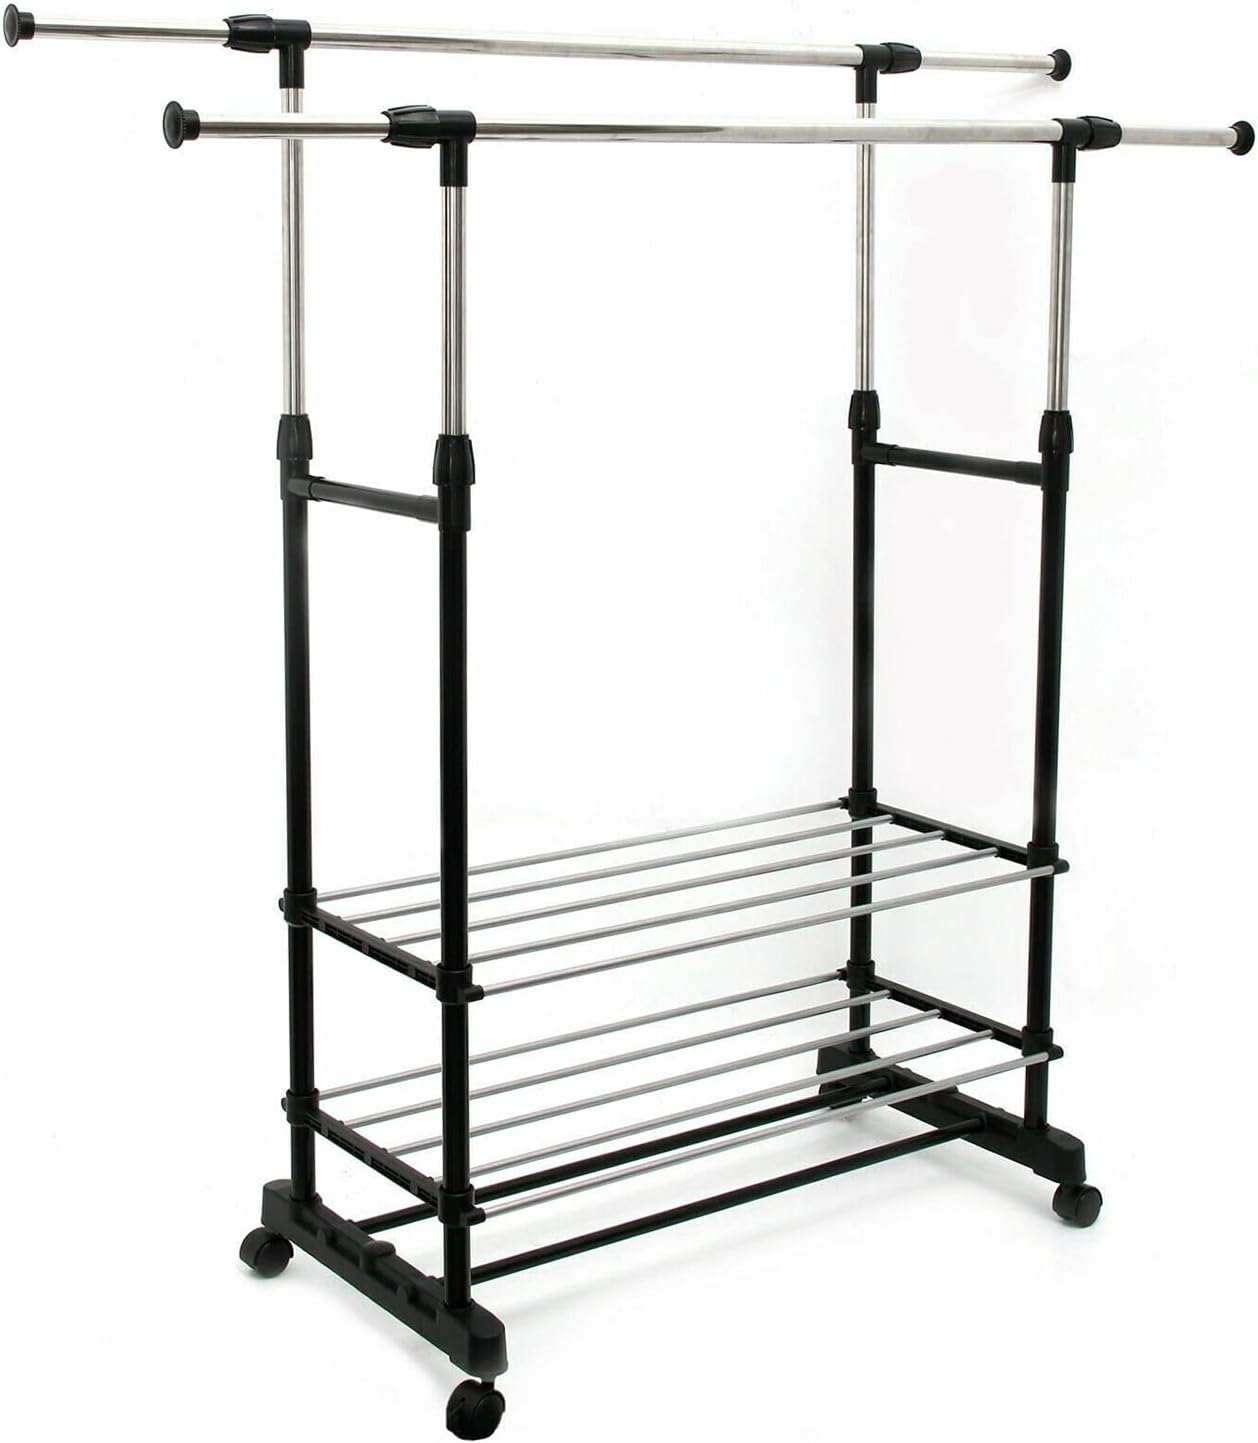 NAIMP Adjustable Double-Rail Garment Rack, Mobile Tidy Rack Clothes Rail Stand on 4 Castor Wheels,with Hanging Rail and Storage Shelf, for Bedroom(Black,145x42x160cm)